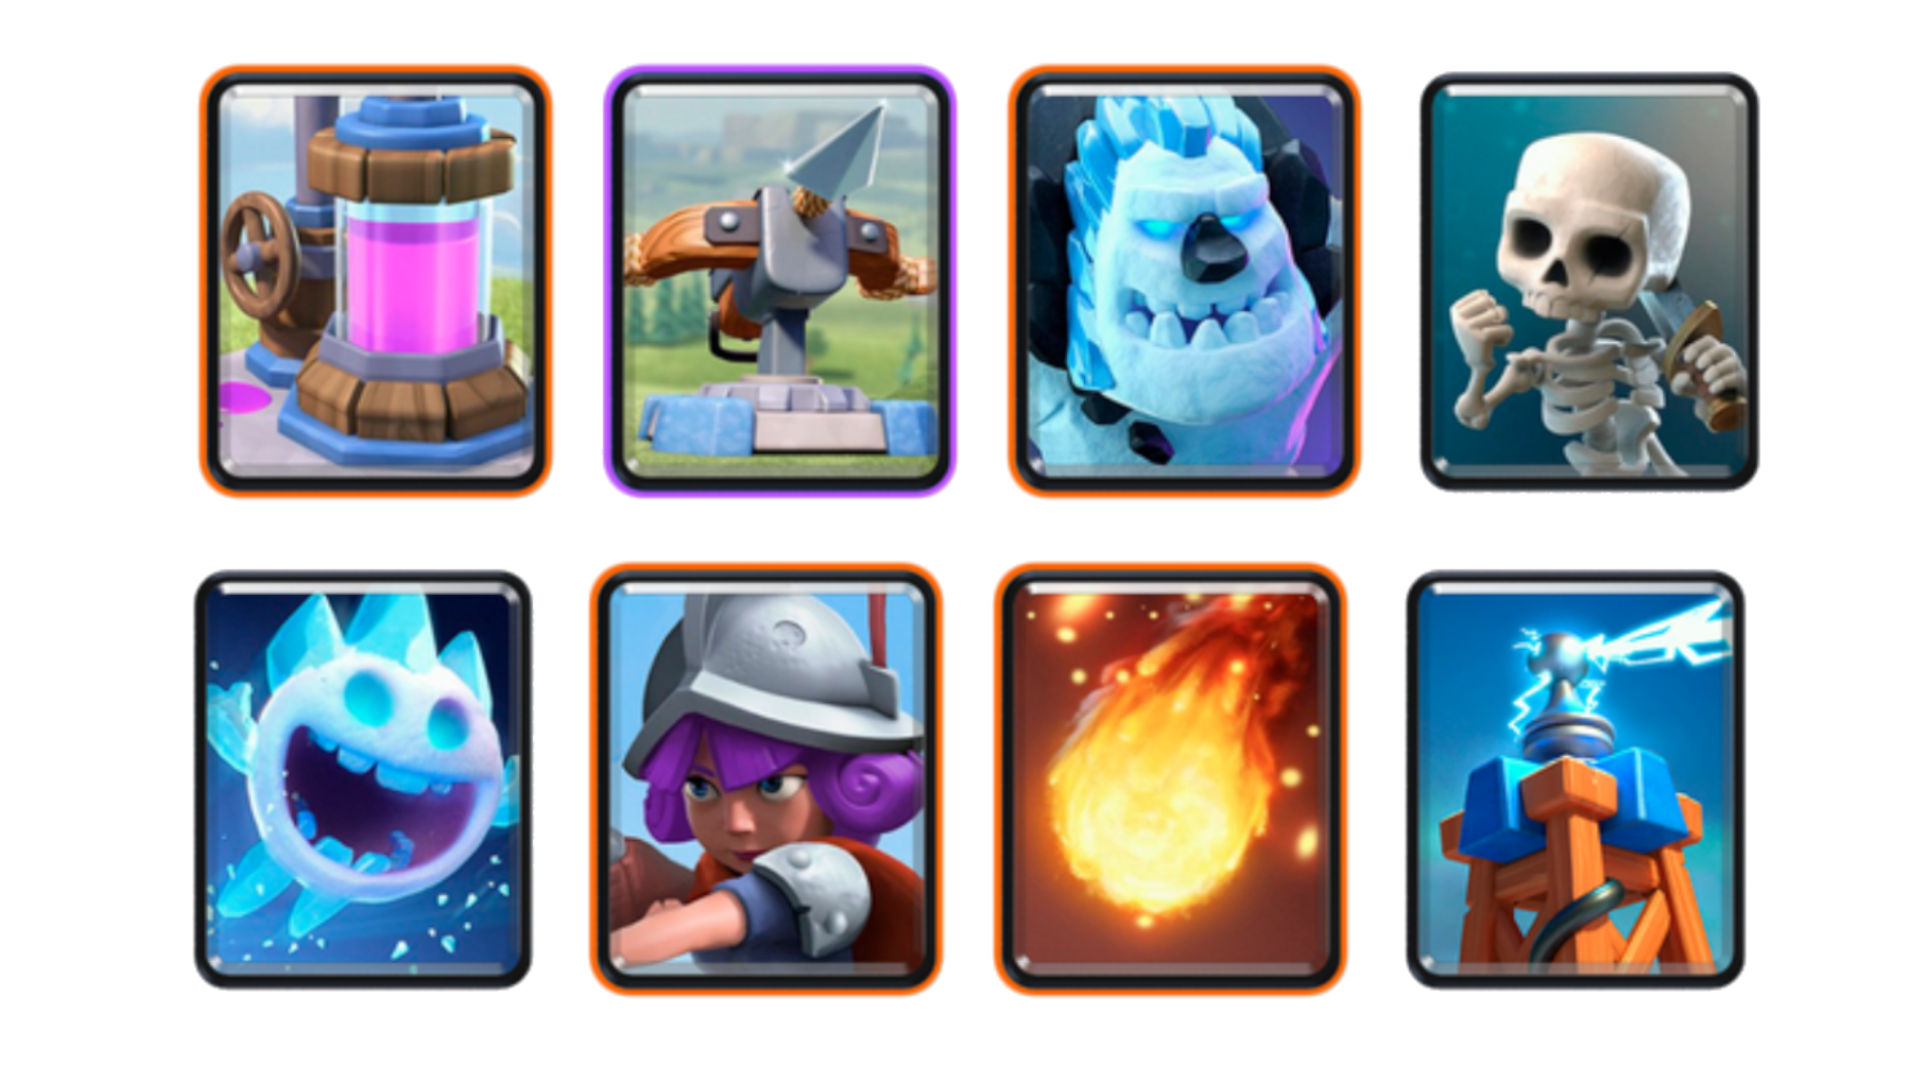 BEST DECK for Arena 12 in Clash Royale! (June 2021) 